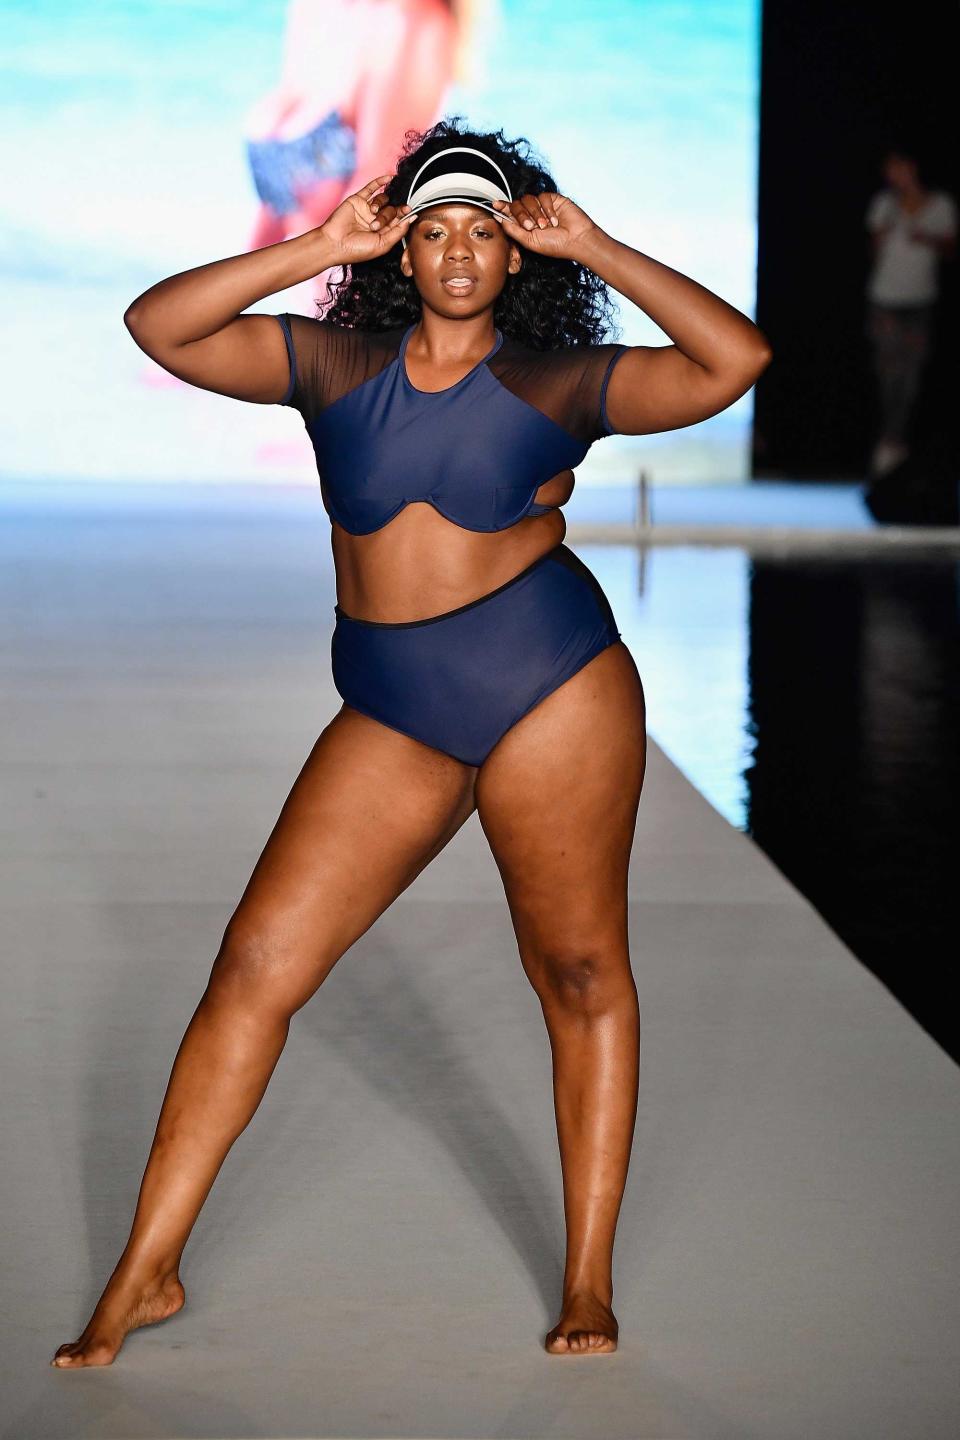 <p>A model walks the runway wearing a sporty navy sheer swimsuit and visor for the 2018 <em>Sports Illustrated </em>swimsuit show during the Paraiso Fashion Fair in Miami at the W South Beach hotel on July 15. (Photo: Alexander Tamargo/Getty Images for Sports Illustrated) </p>